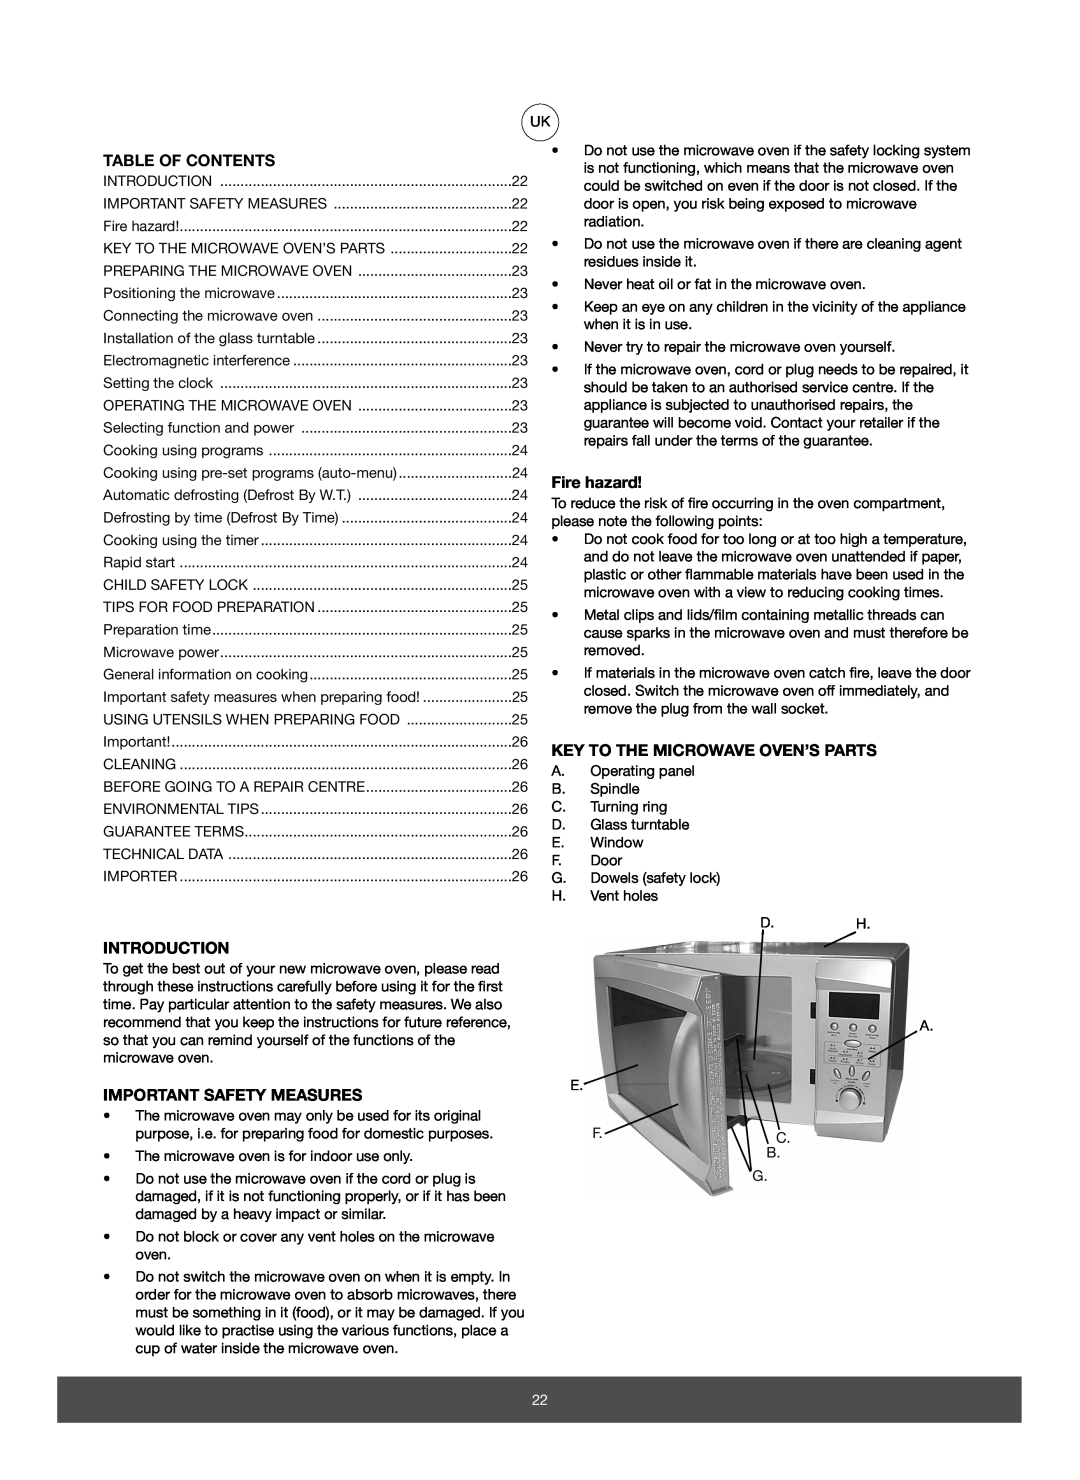 Melissa 653-082 Table Of Contents, Fire hazard, Key To The Microwave Oven’S Parts, Introduction, Important Safety Measures 